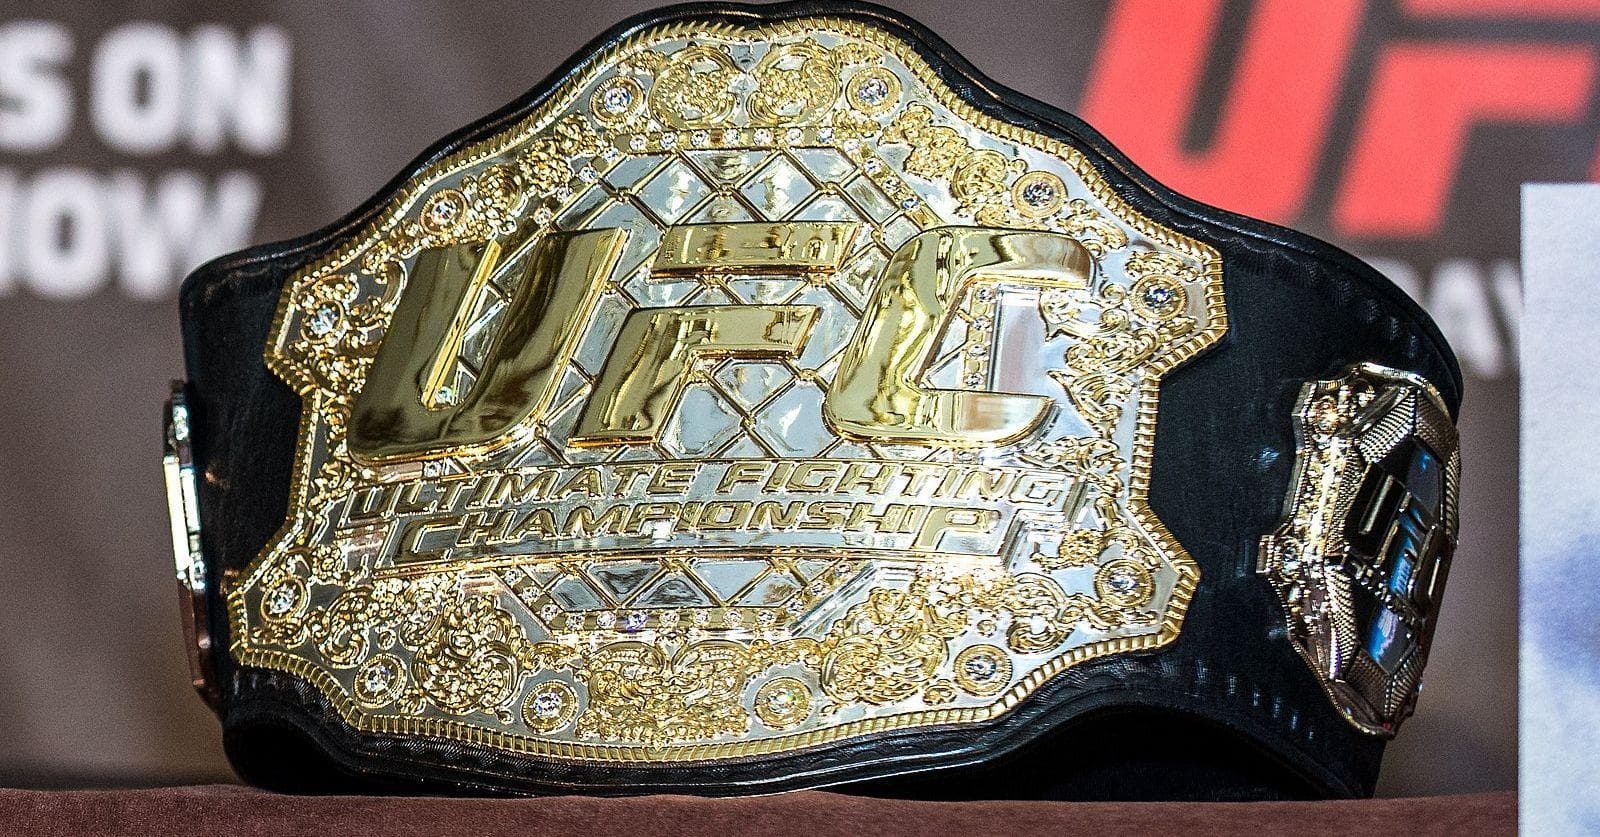 Championship Belts: Photo List of Championship Belts from All Sports